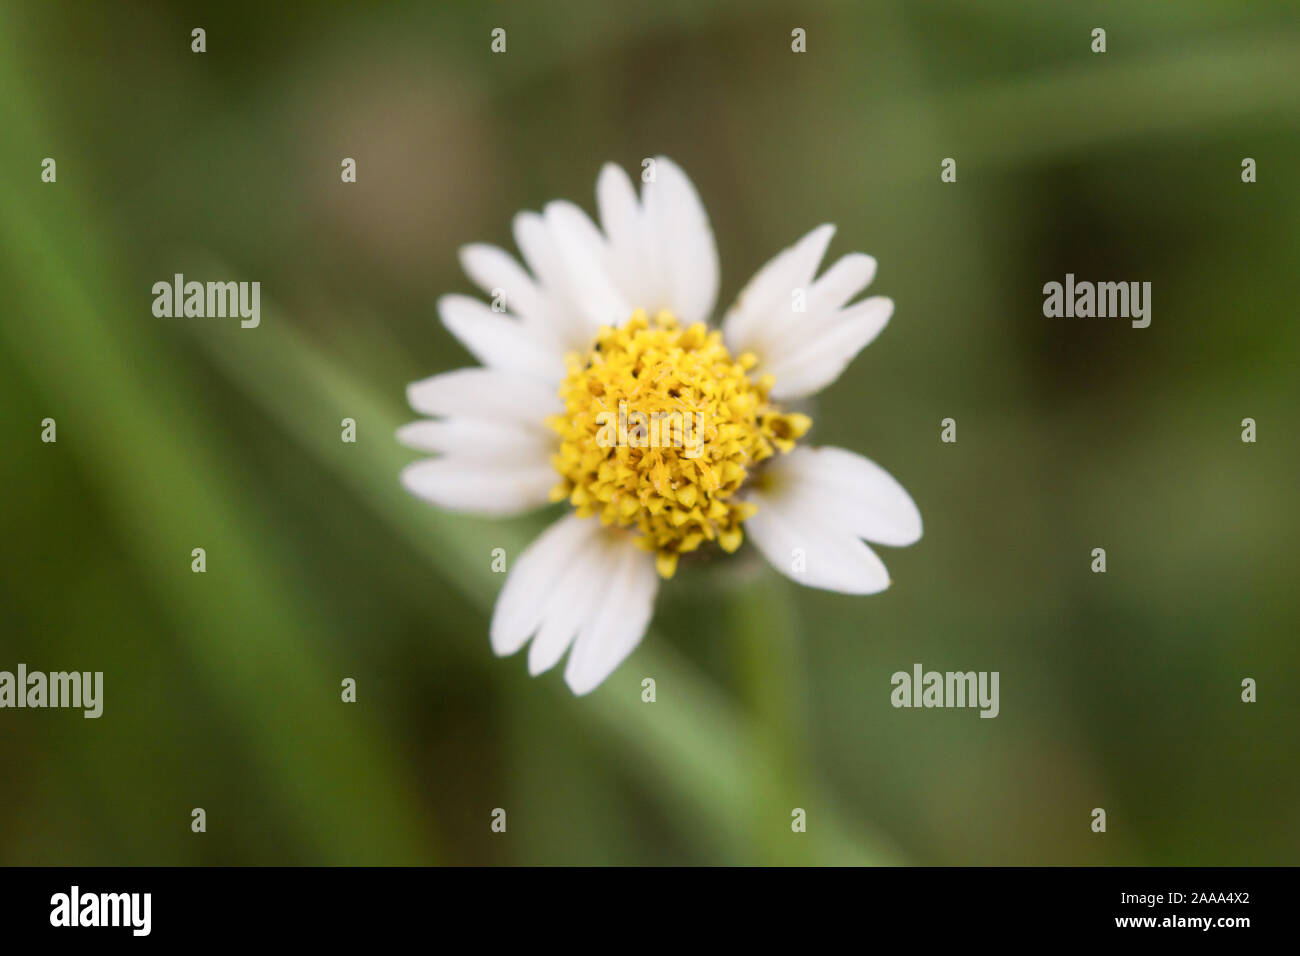 Coatbuttons, Mexican daisy, Tridax procumbens, Asteraceae, Wild Daisy on blur background. Stock Photo